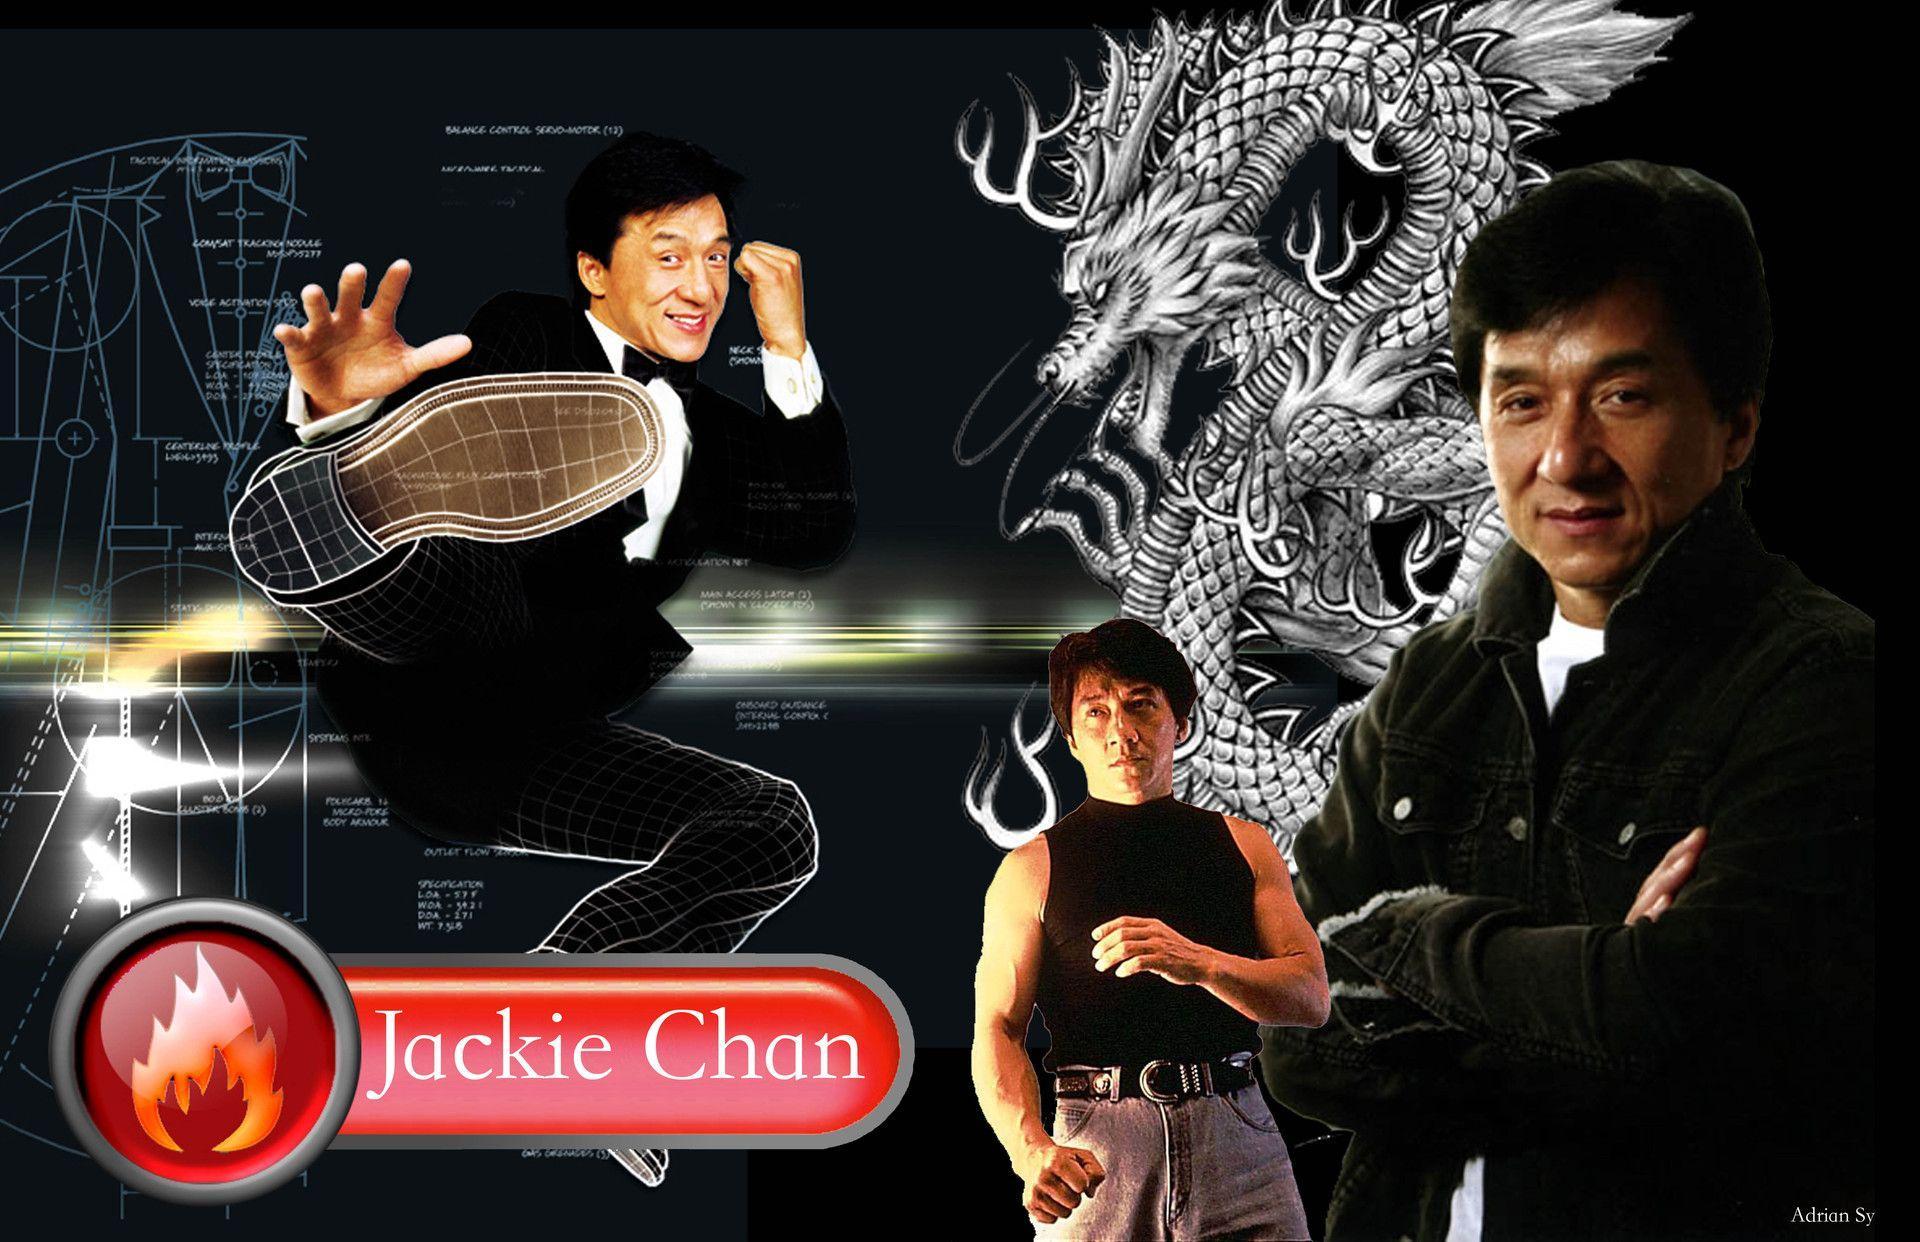 Jackie Chan Wallpaper, High Quality Wallpaper of Jackie Chan